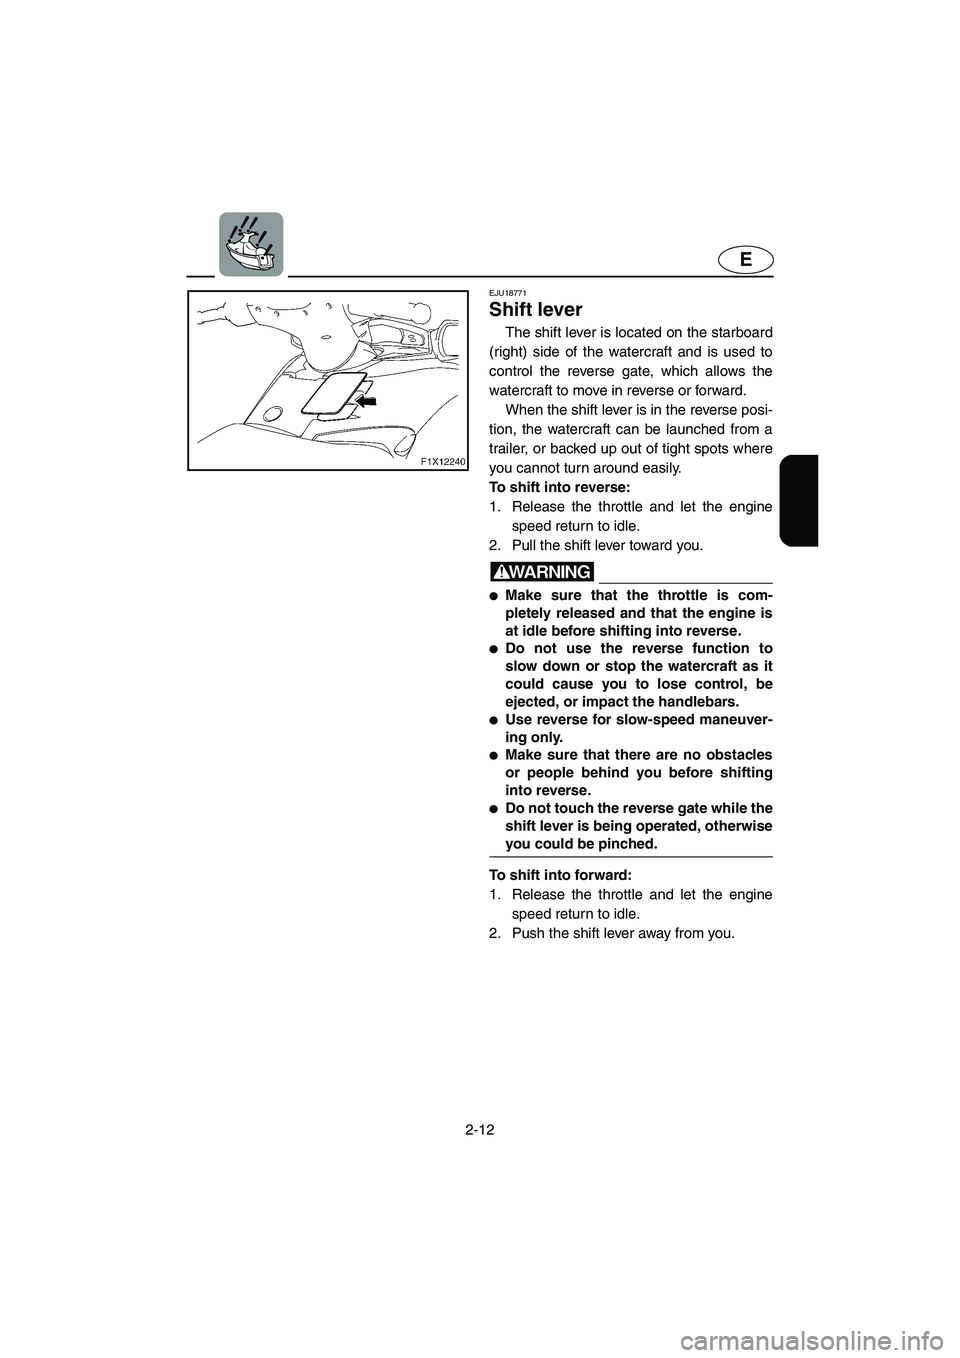 YAMAHA FX CRUISER 2006 Service Manual 2-12
E
EJU18771 
Shift lever 
The shift lever is located on the starboard
(right) side of the watercraft and is used to
control the reverse gate, which allows the
watercraft to move in reverse or forw